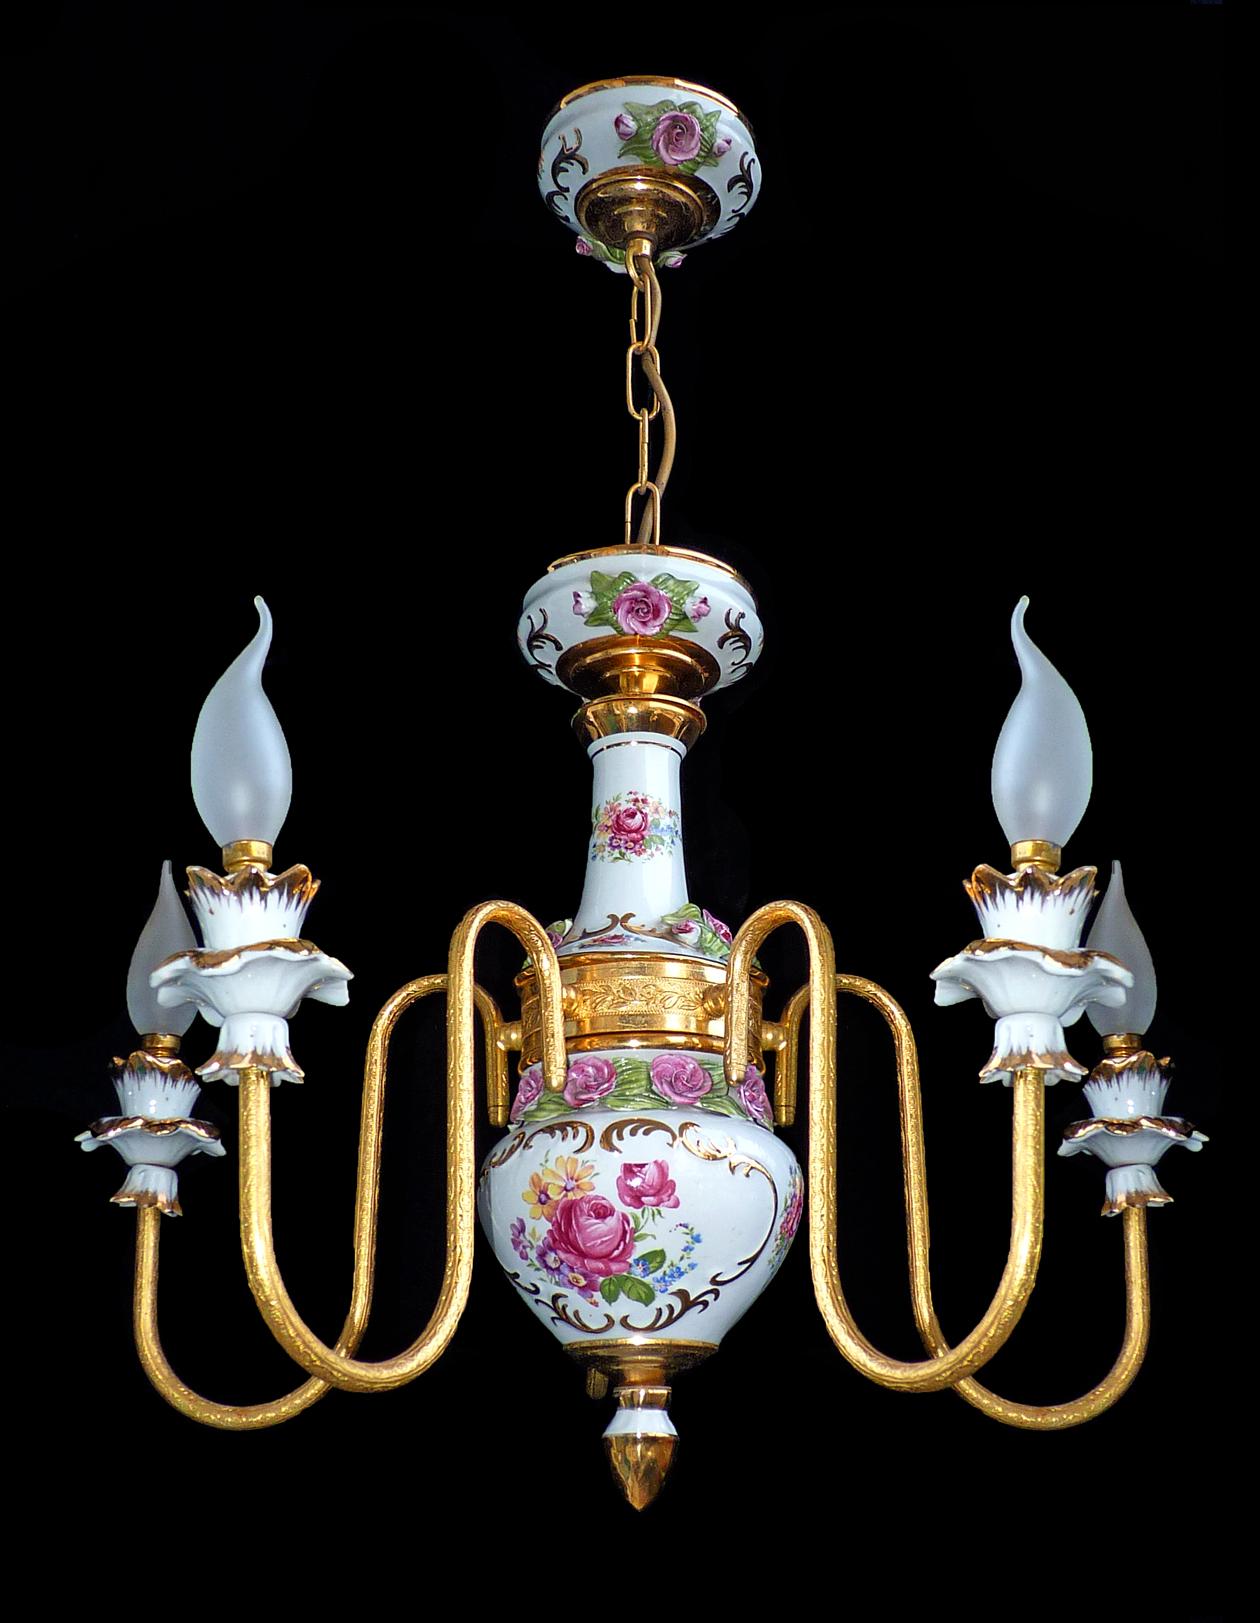 Gorgeous French Limoges style porcelain chandelier with five-light bulbs and sculpted applique porcelain roses, leaves and gilt brass
Measures:
Diameter 23.6 in/ 60 cm
Height 29.5 in/ 75 cm, Chain (20 cm)
Weight: 10 lb/ 5 Kg
Five light bulbs